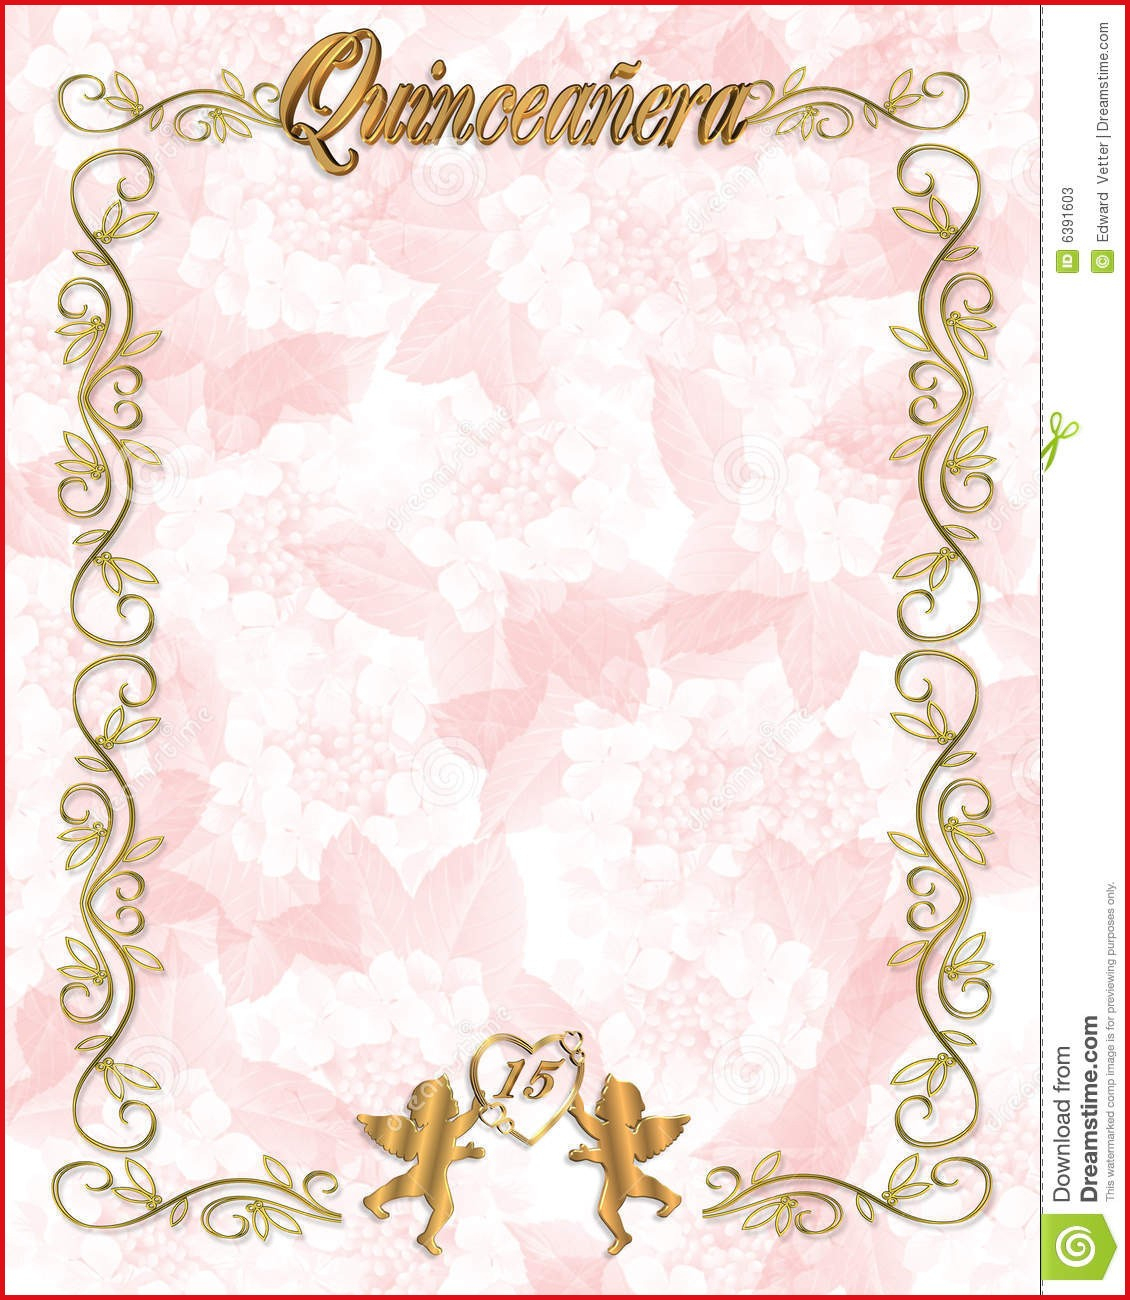 Free Printable Invitation Templates For Word - Template #4818 | Jay - Free Printable Quinceanera Invitations